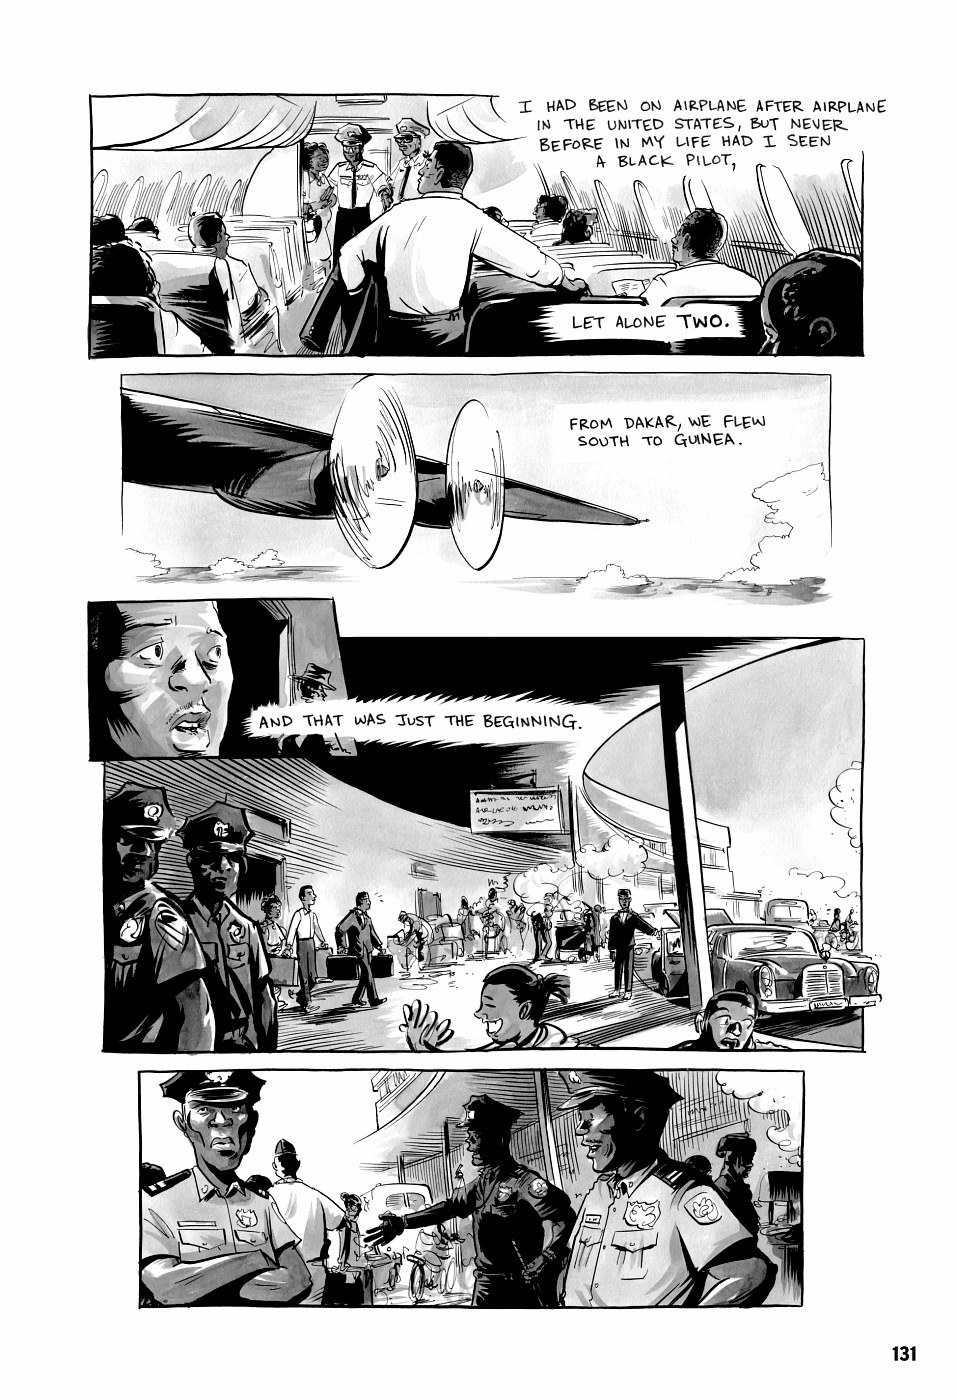 page 131 of march book three graphic novel